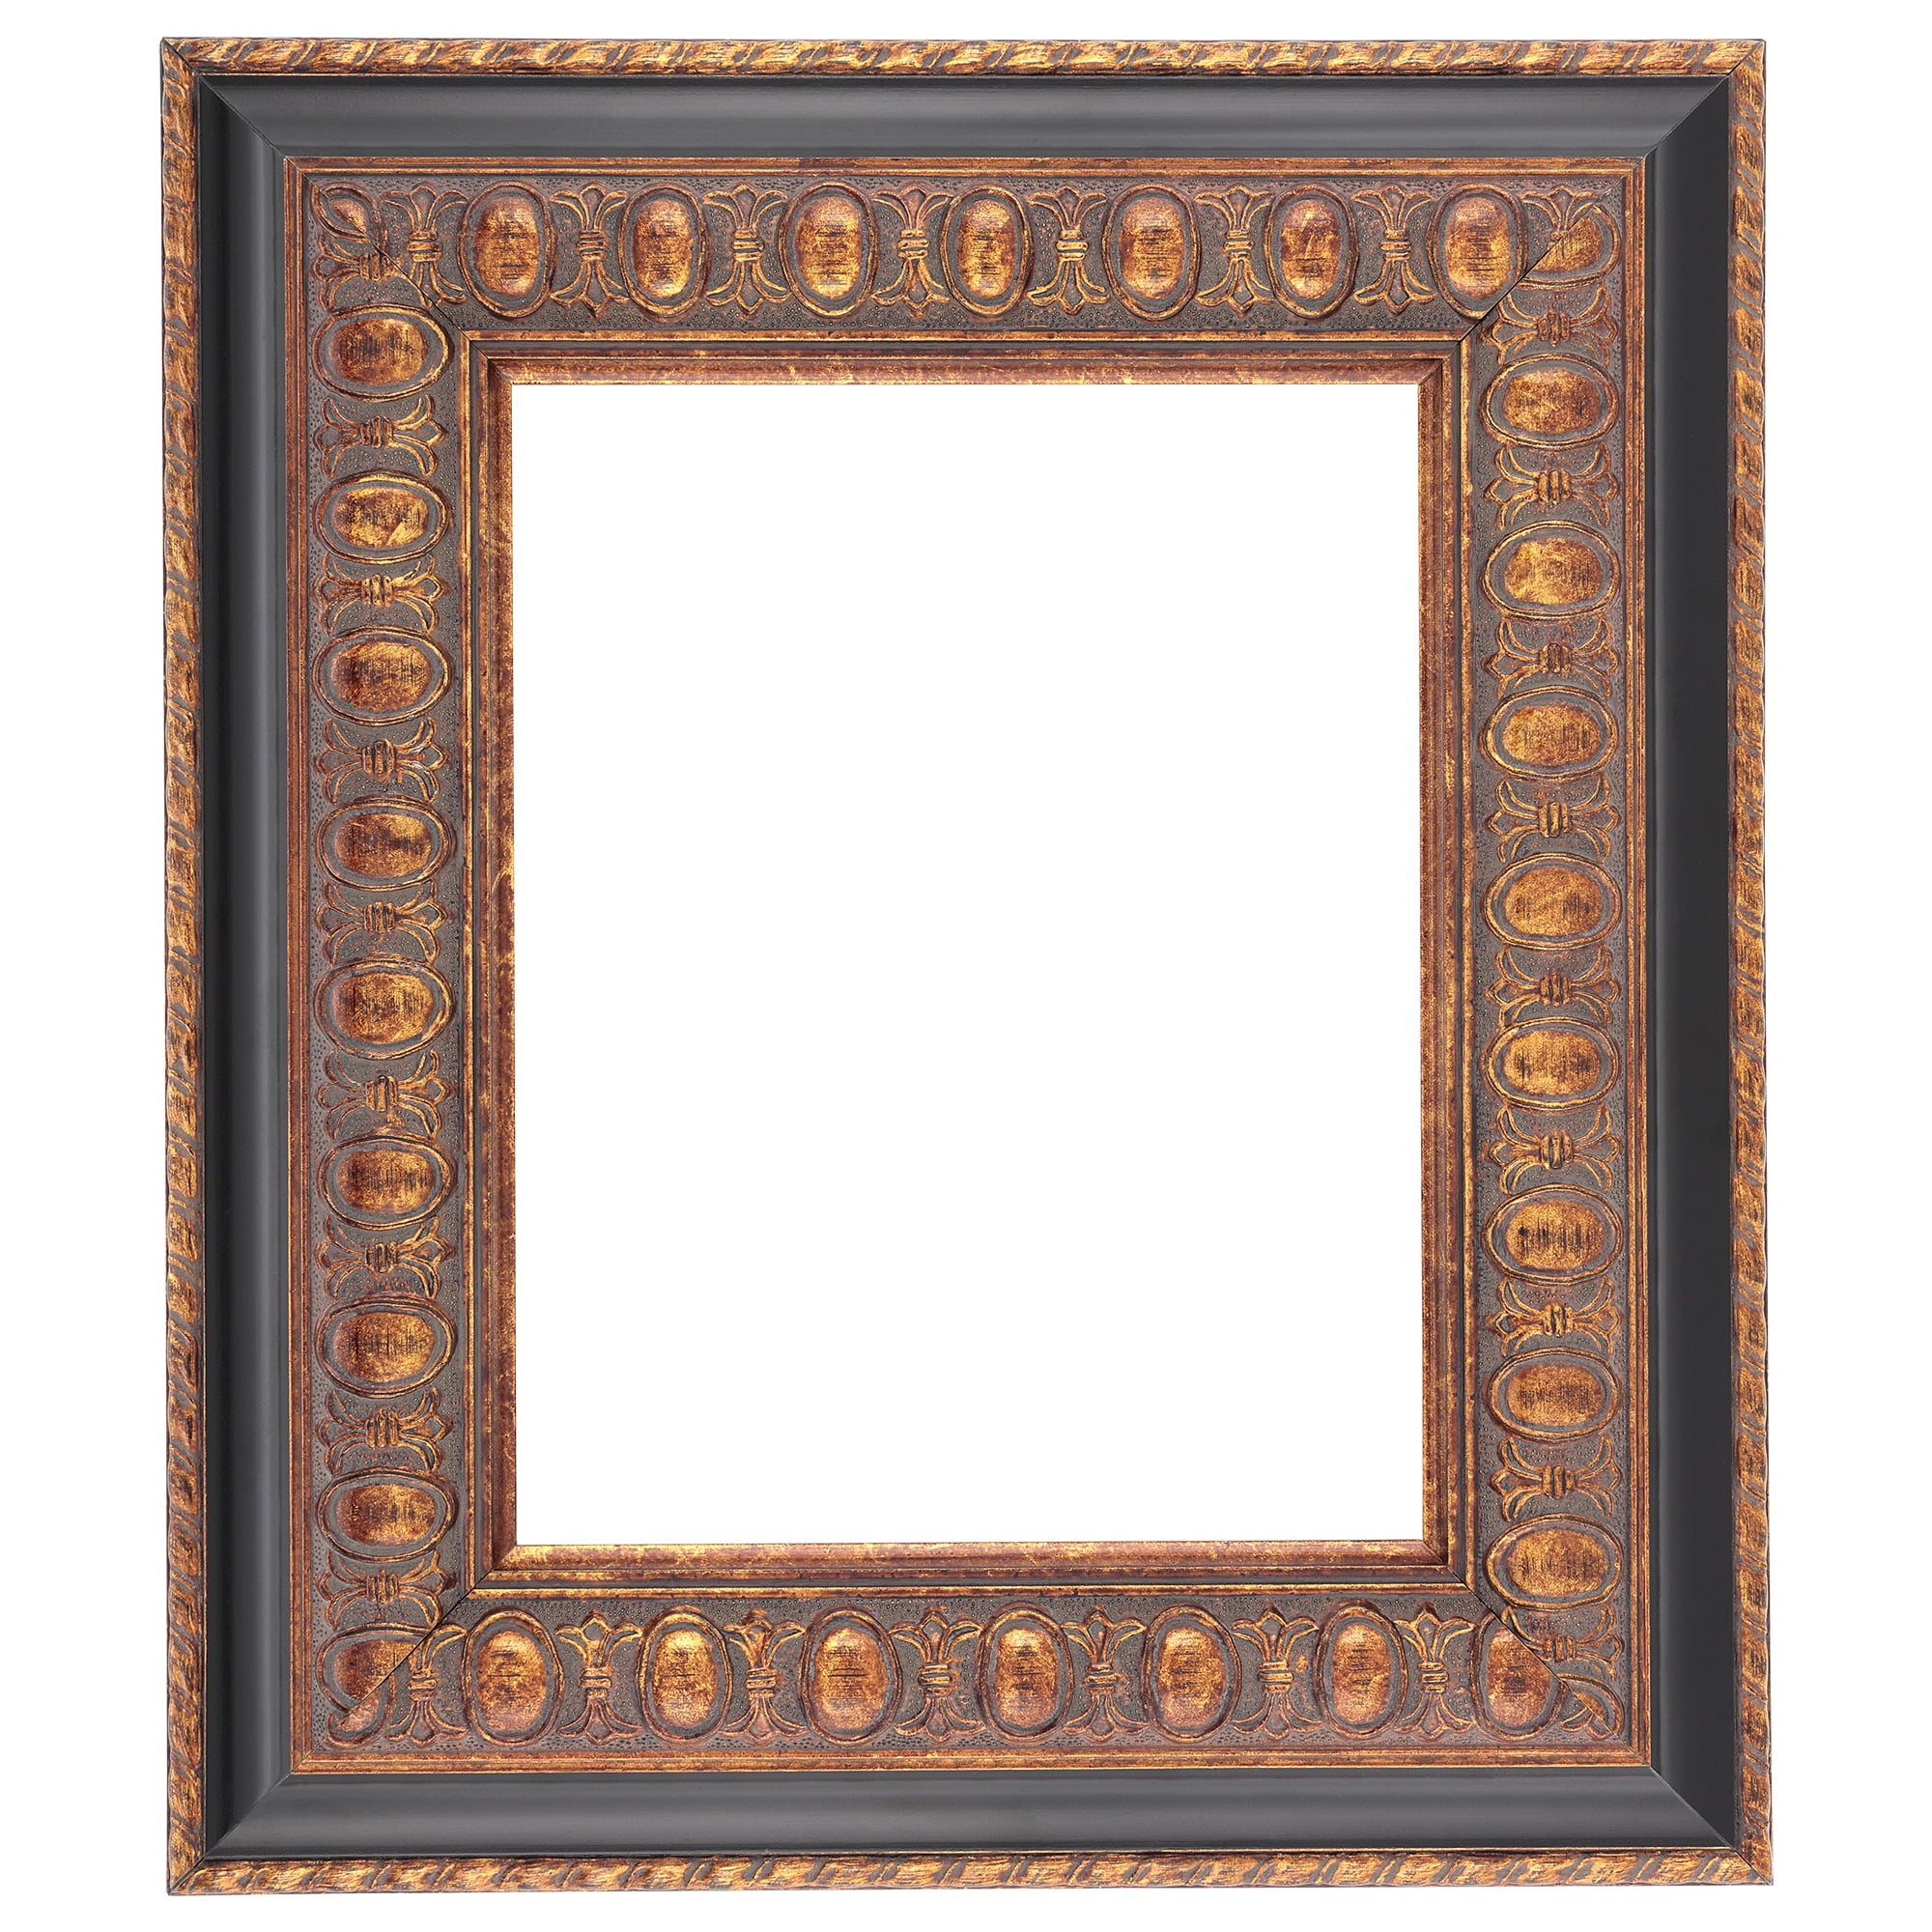 FRAMES BY POST Metro Vintage Wood Photo Frame A3